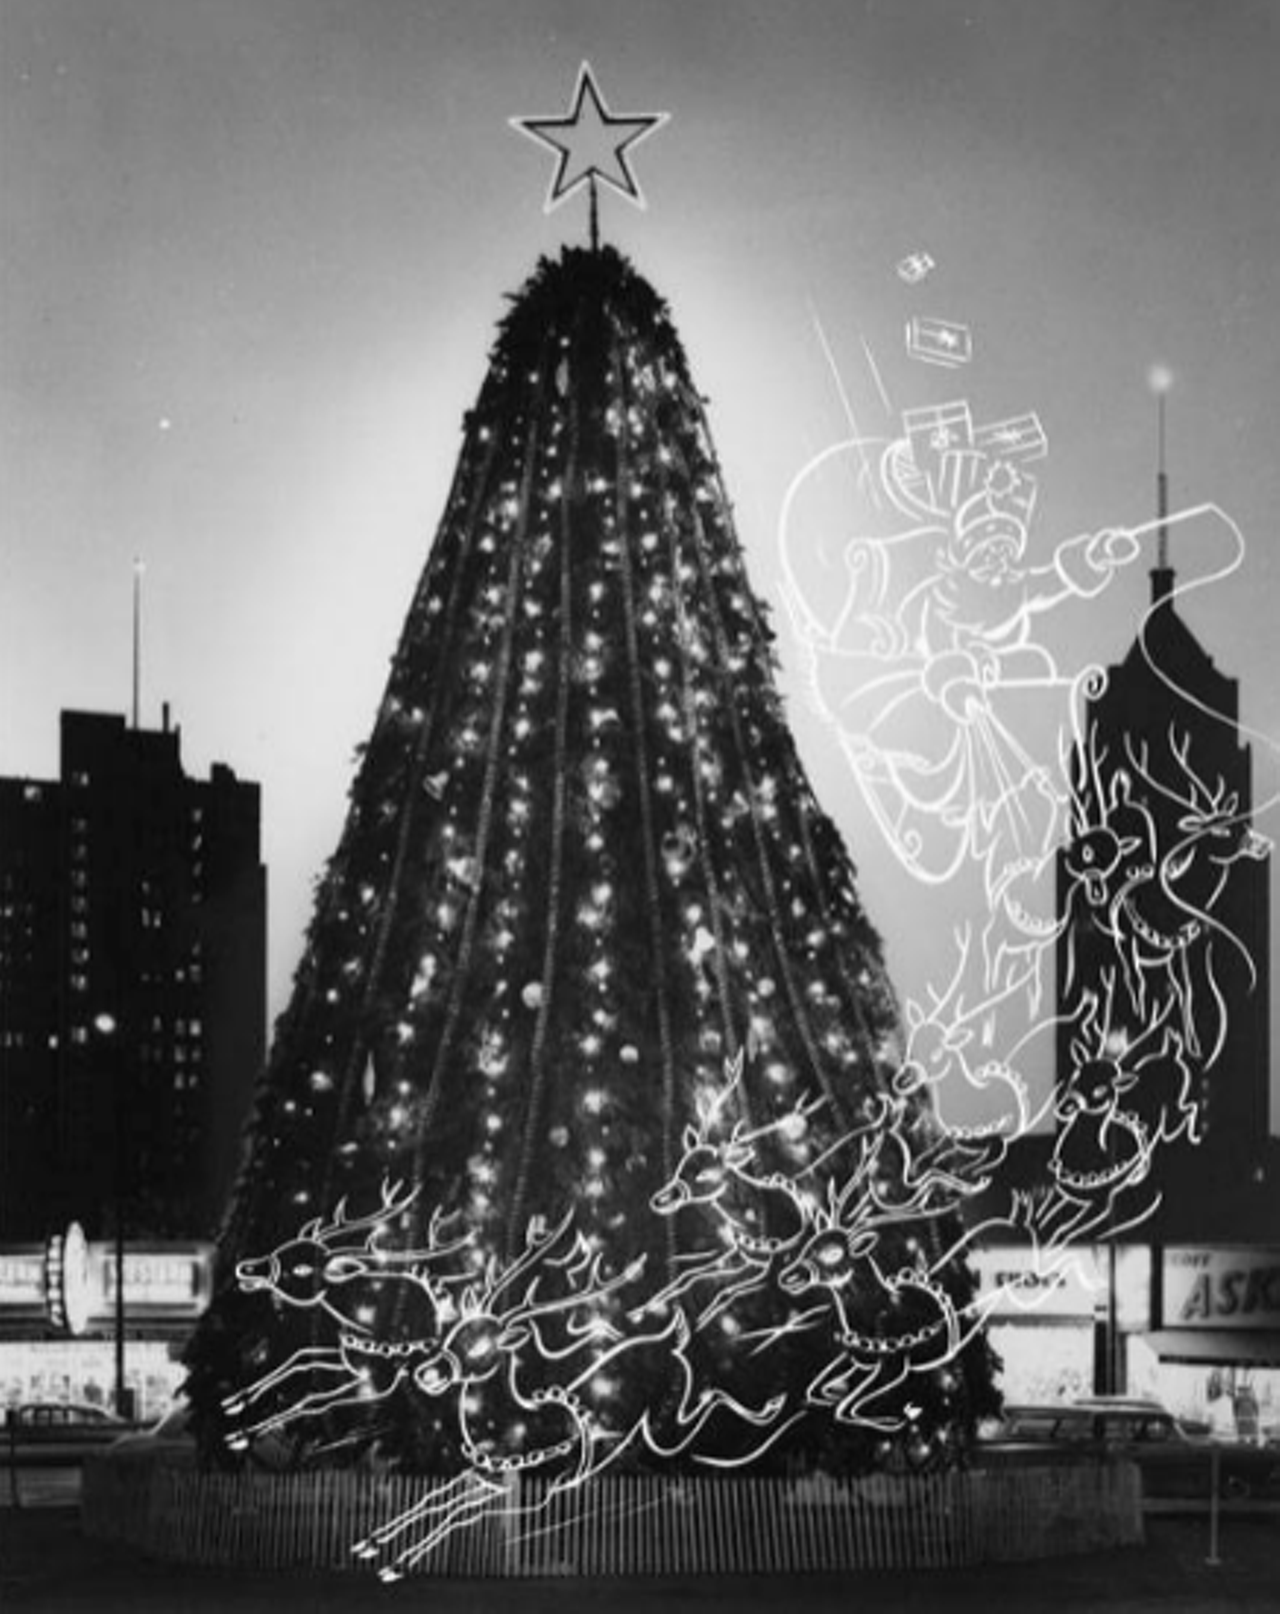 While this photo is undated, you can see the city's official Christmas tree on display in Alamo Plaza.